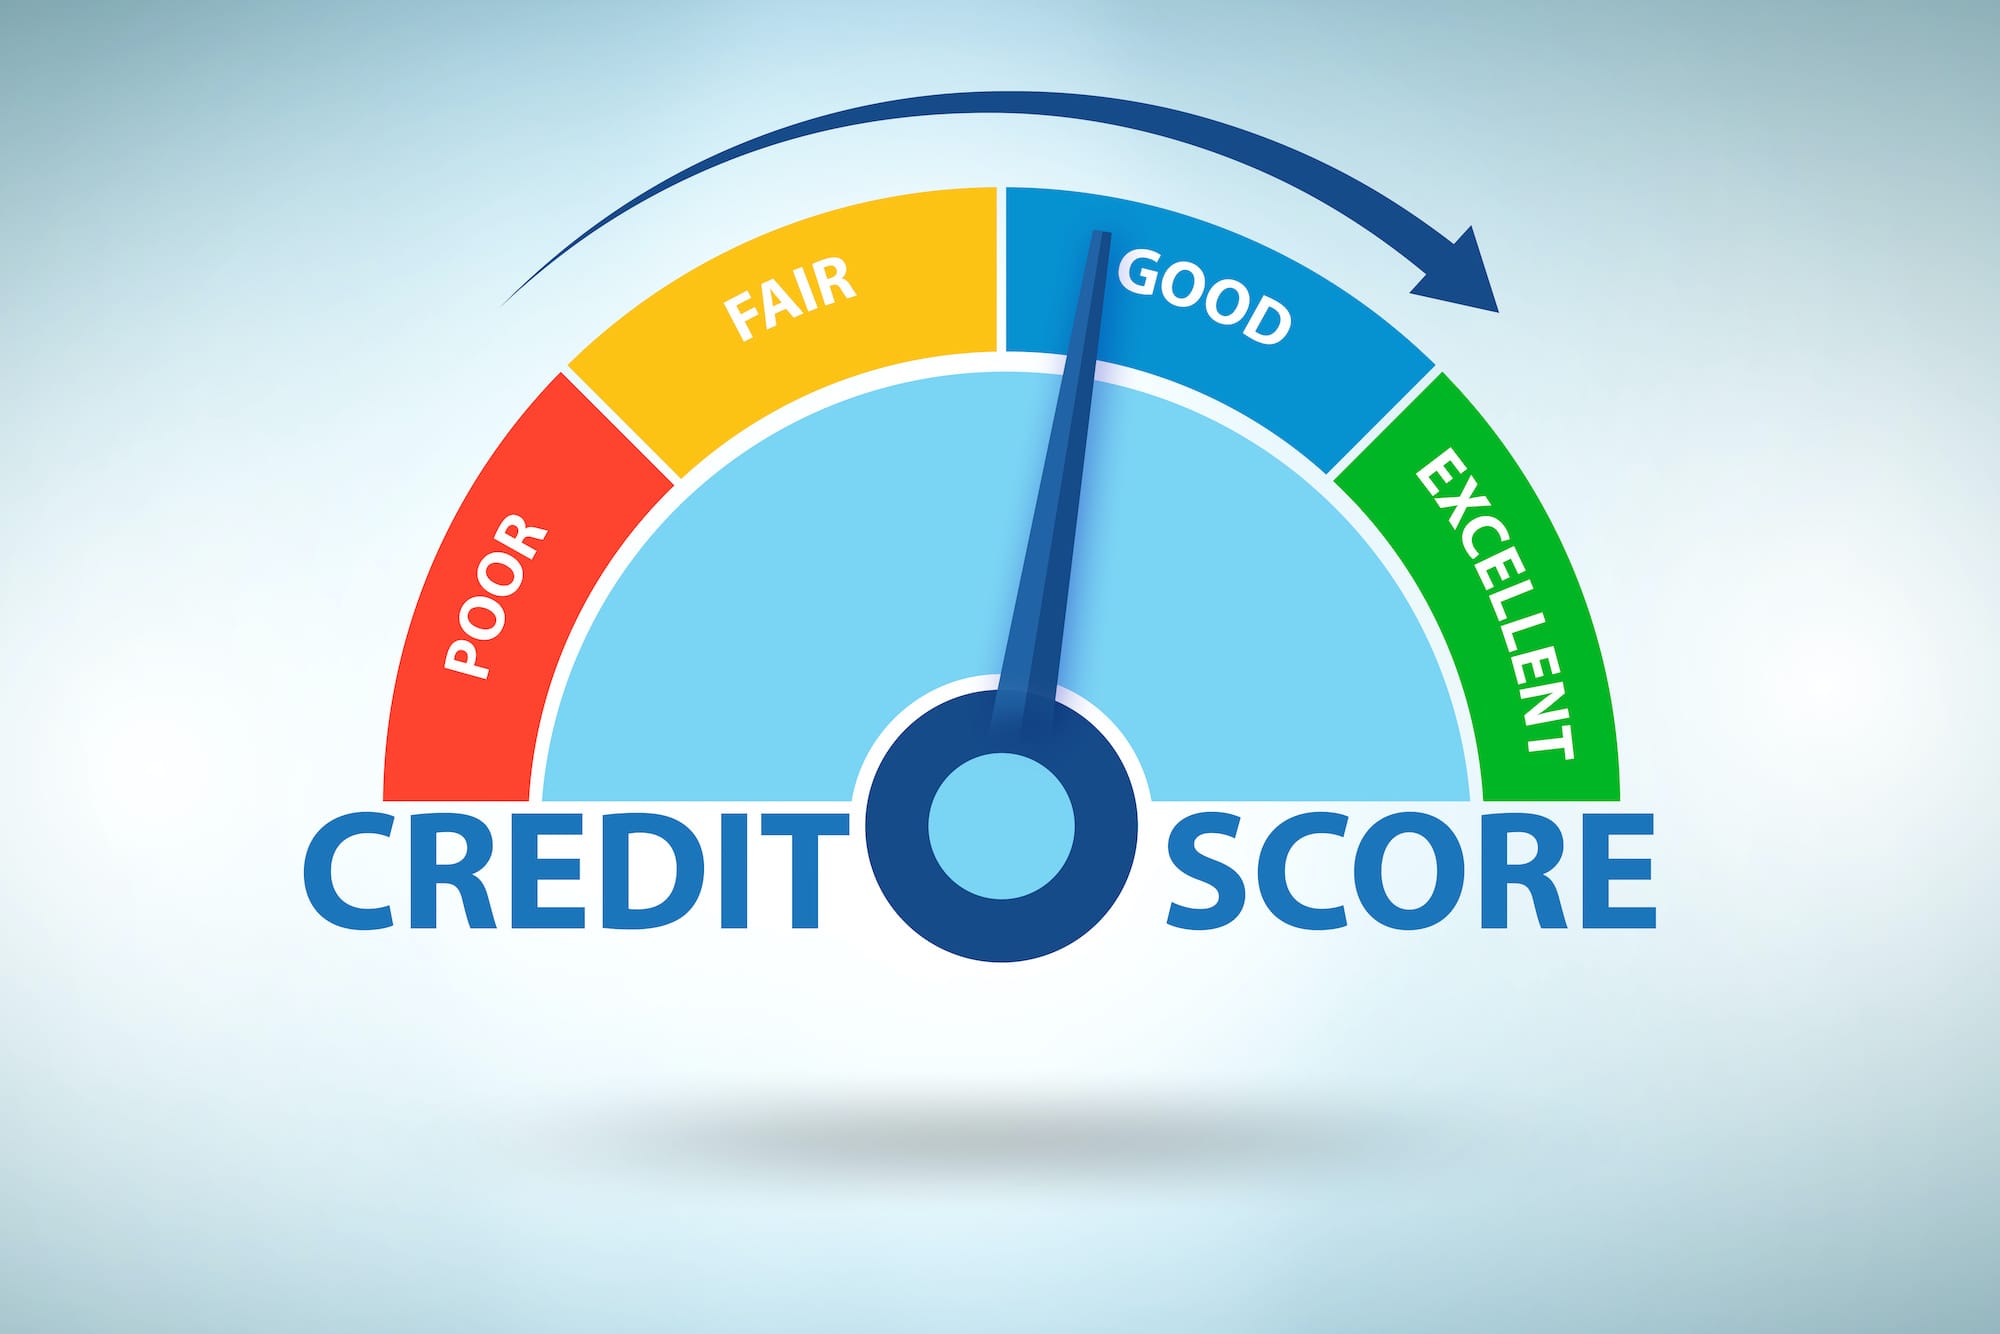 Misconceptions About Credit Scores Debunked